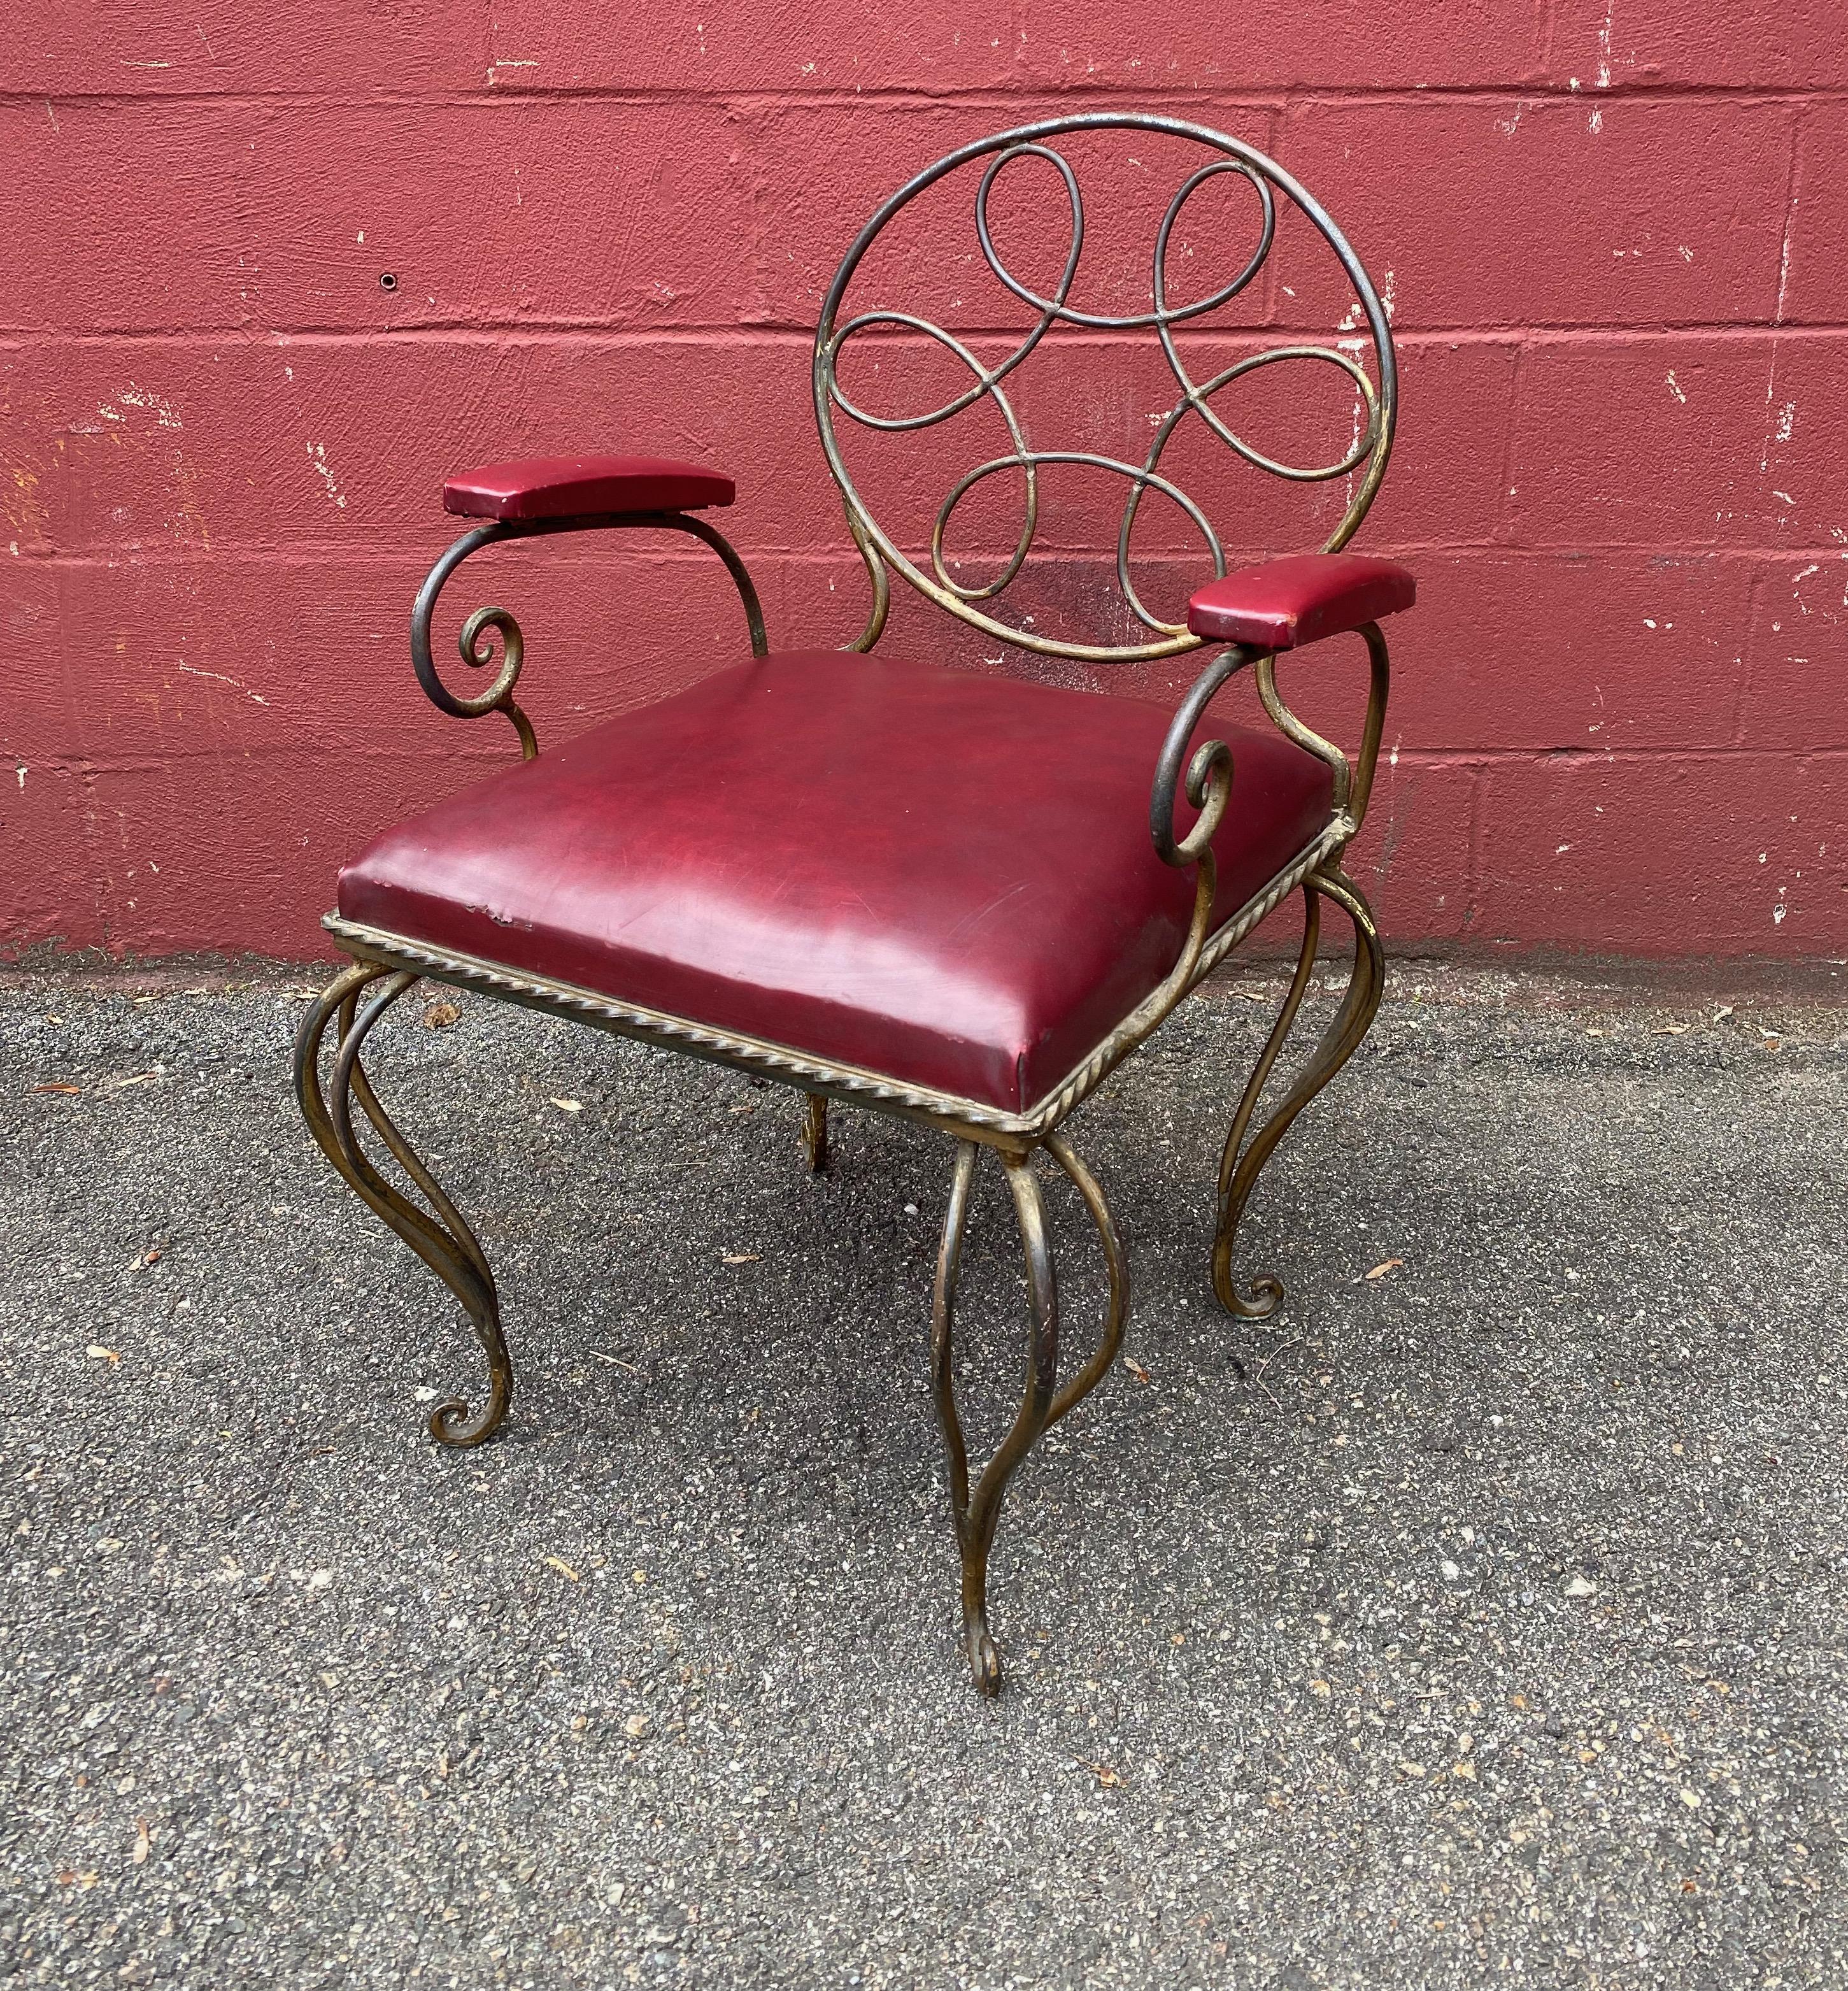 Ornate Wrought Iron Armchair in Oxblood Red Vinyl For Sale 2